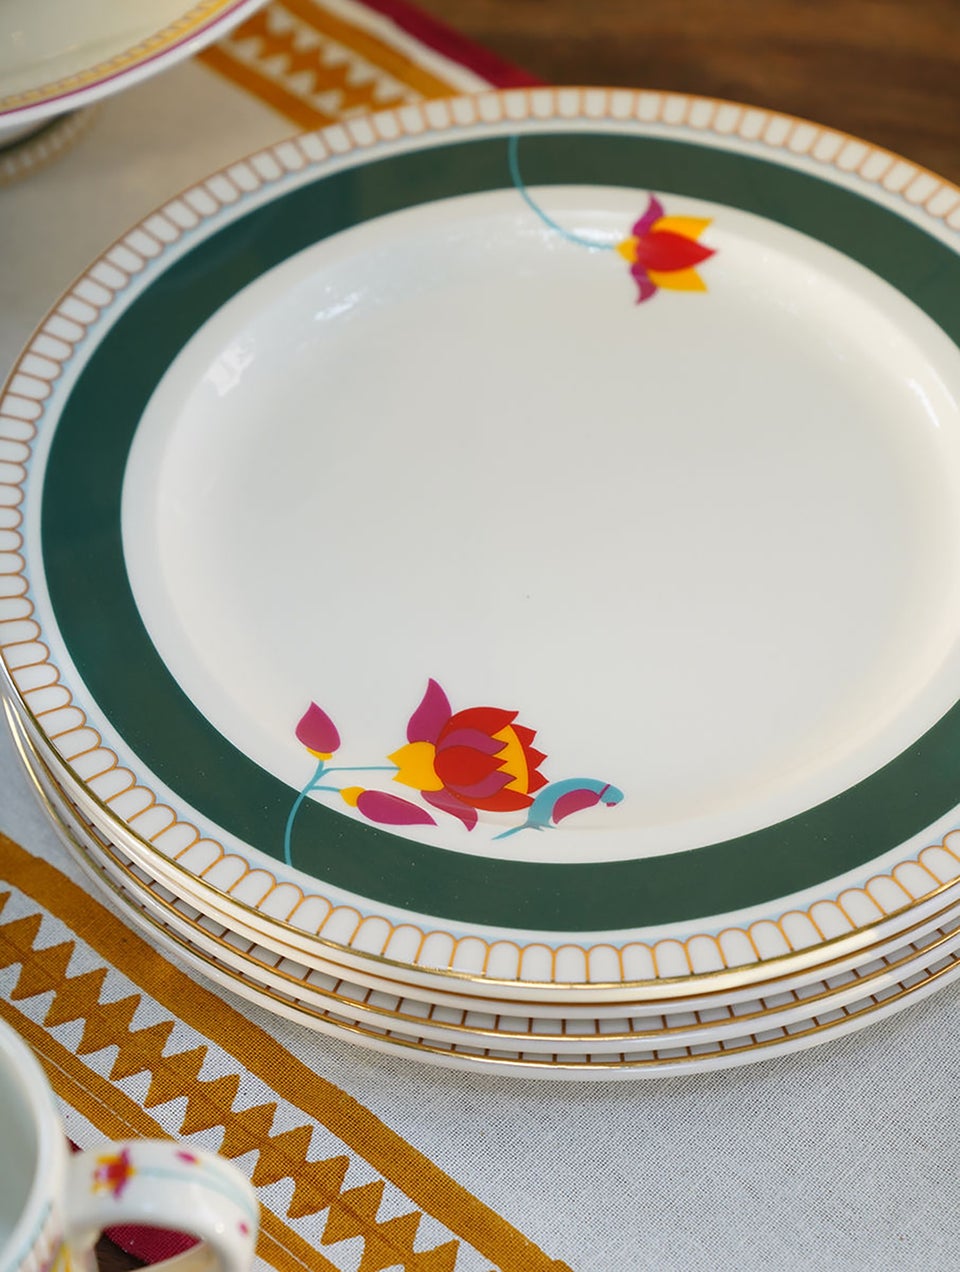 Handcrafted Porcelain Paithan Dinner Plate With 24 Karat Gold Work